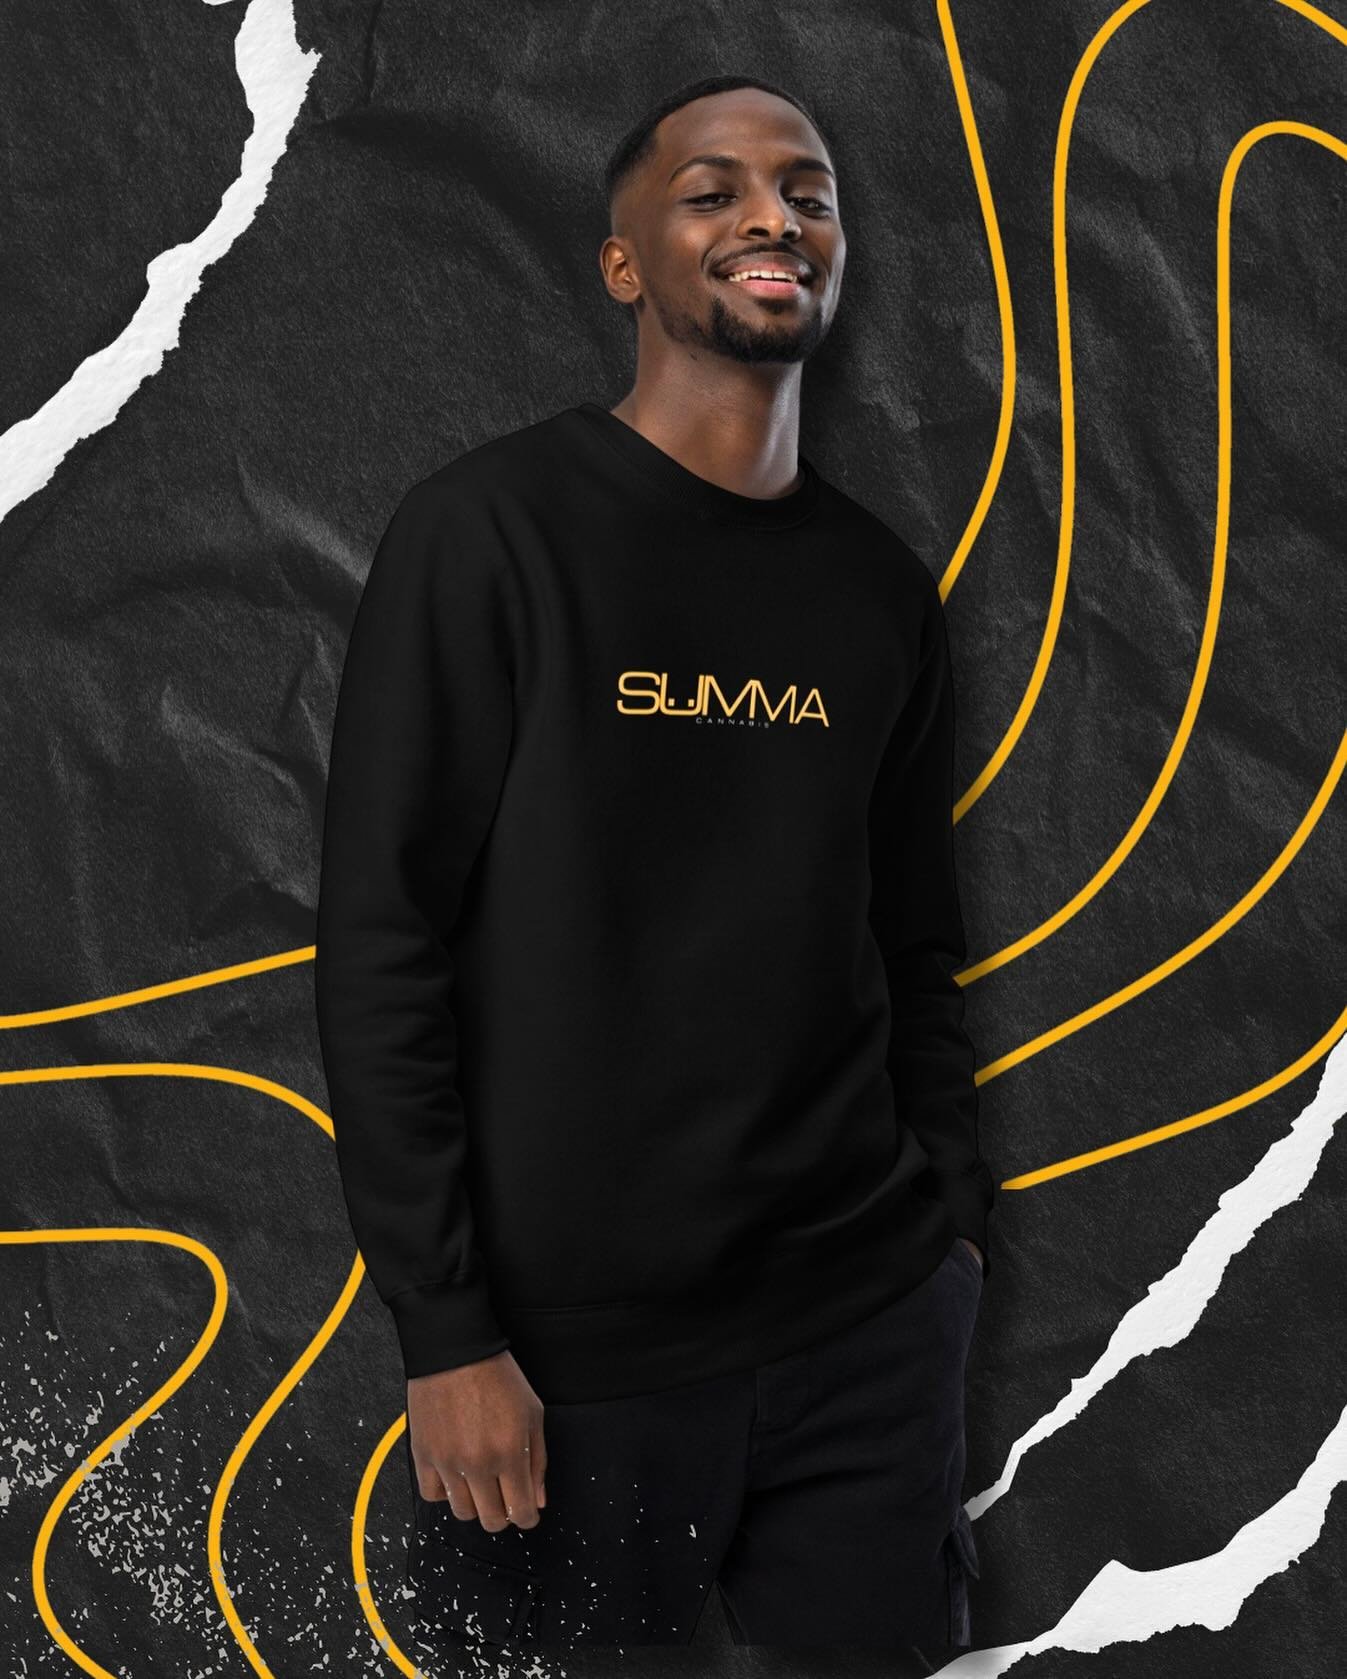 Our exceptional line of Summa hoodies, sweatpants, and head wear would make the perfect gifts for any cannabis lover out there 😎🔥Click the link in bio to check them out! 

Keep out of reach of children. For use only by adults 21 years of age or old